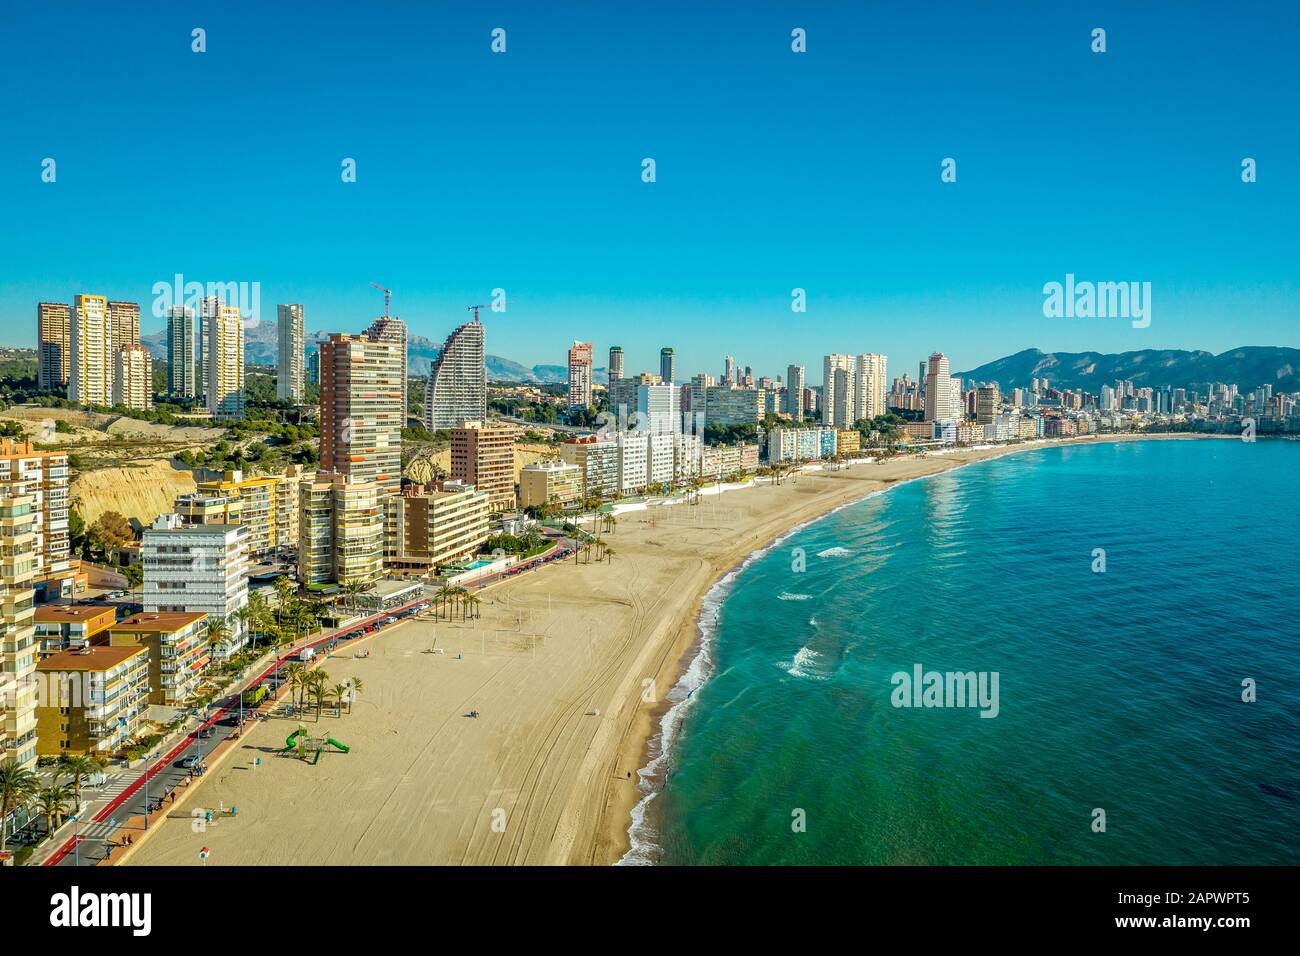 Aerial view of the popular Spanish Mediterranean beach resort town Benidorm with high rise complexes Stock Photo